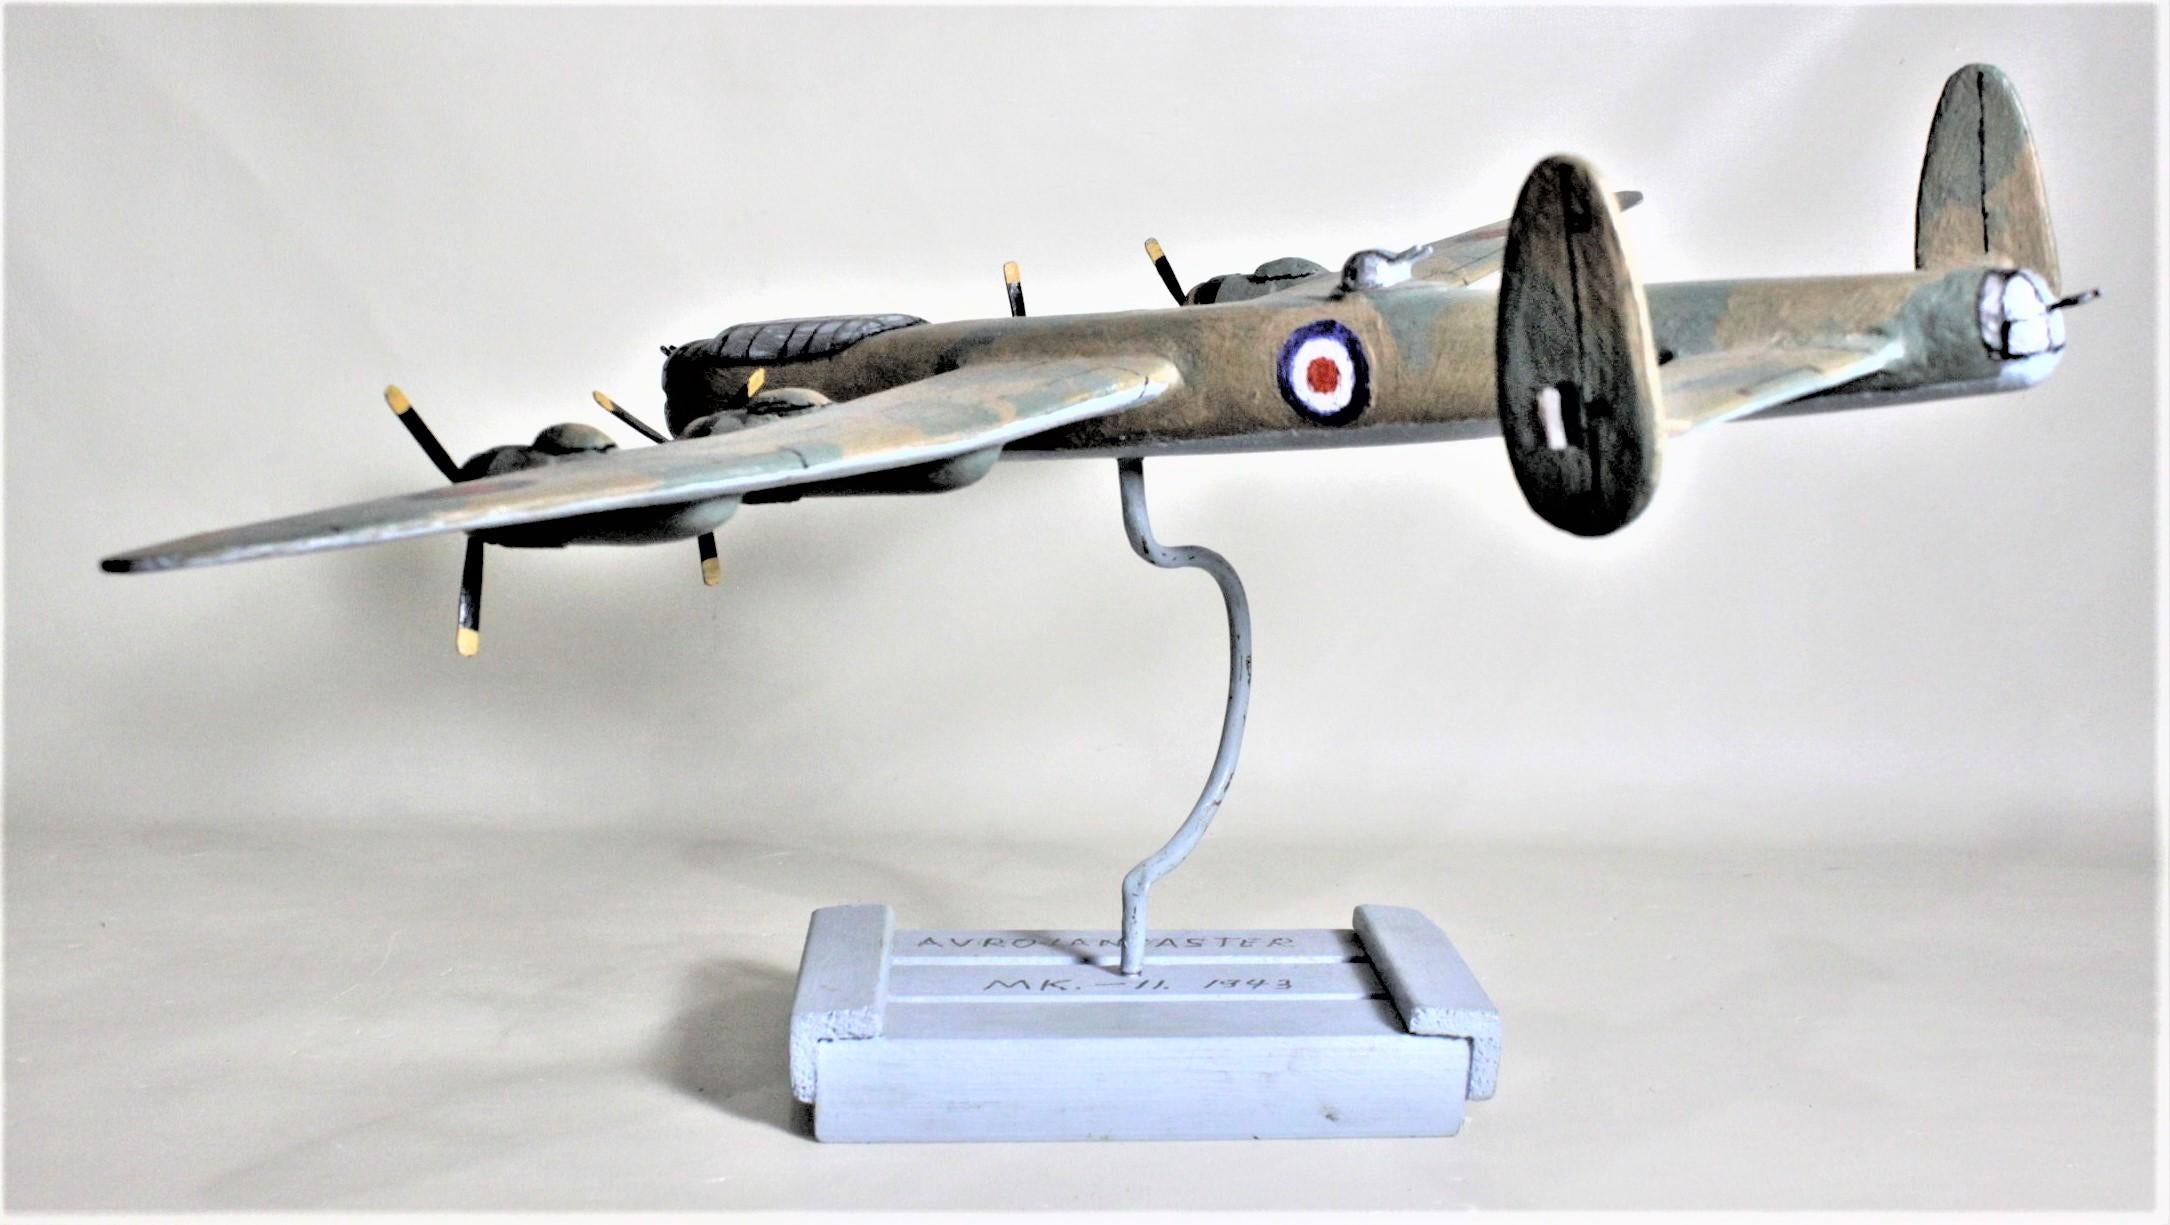 Canadian Folk Art Wooden Hand Carved and Painted WW2 Lancaster Bomber Model Airplane For Sale